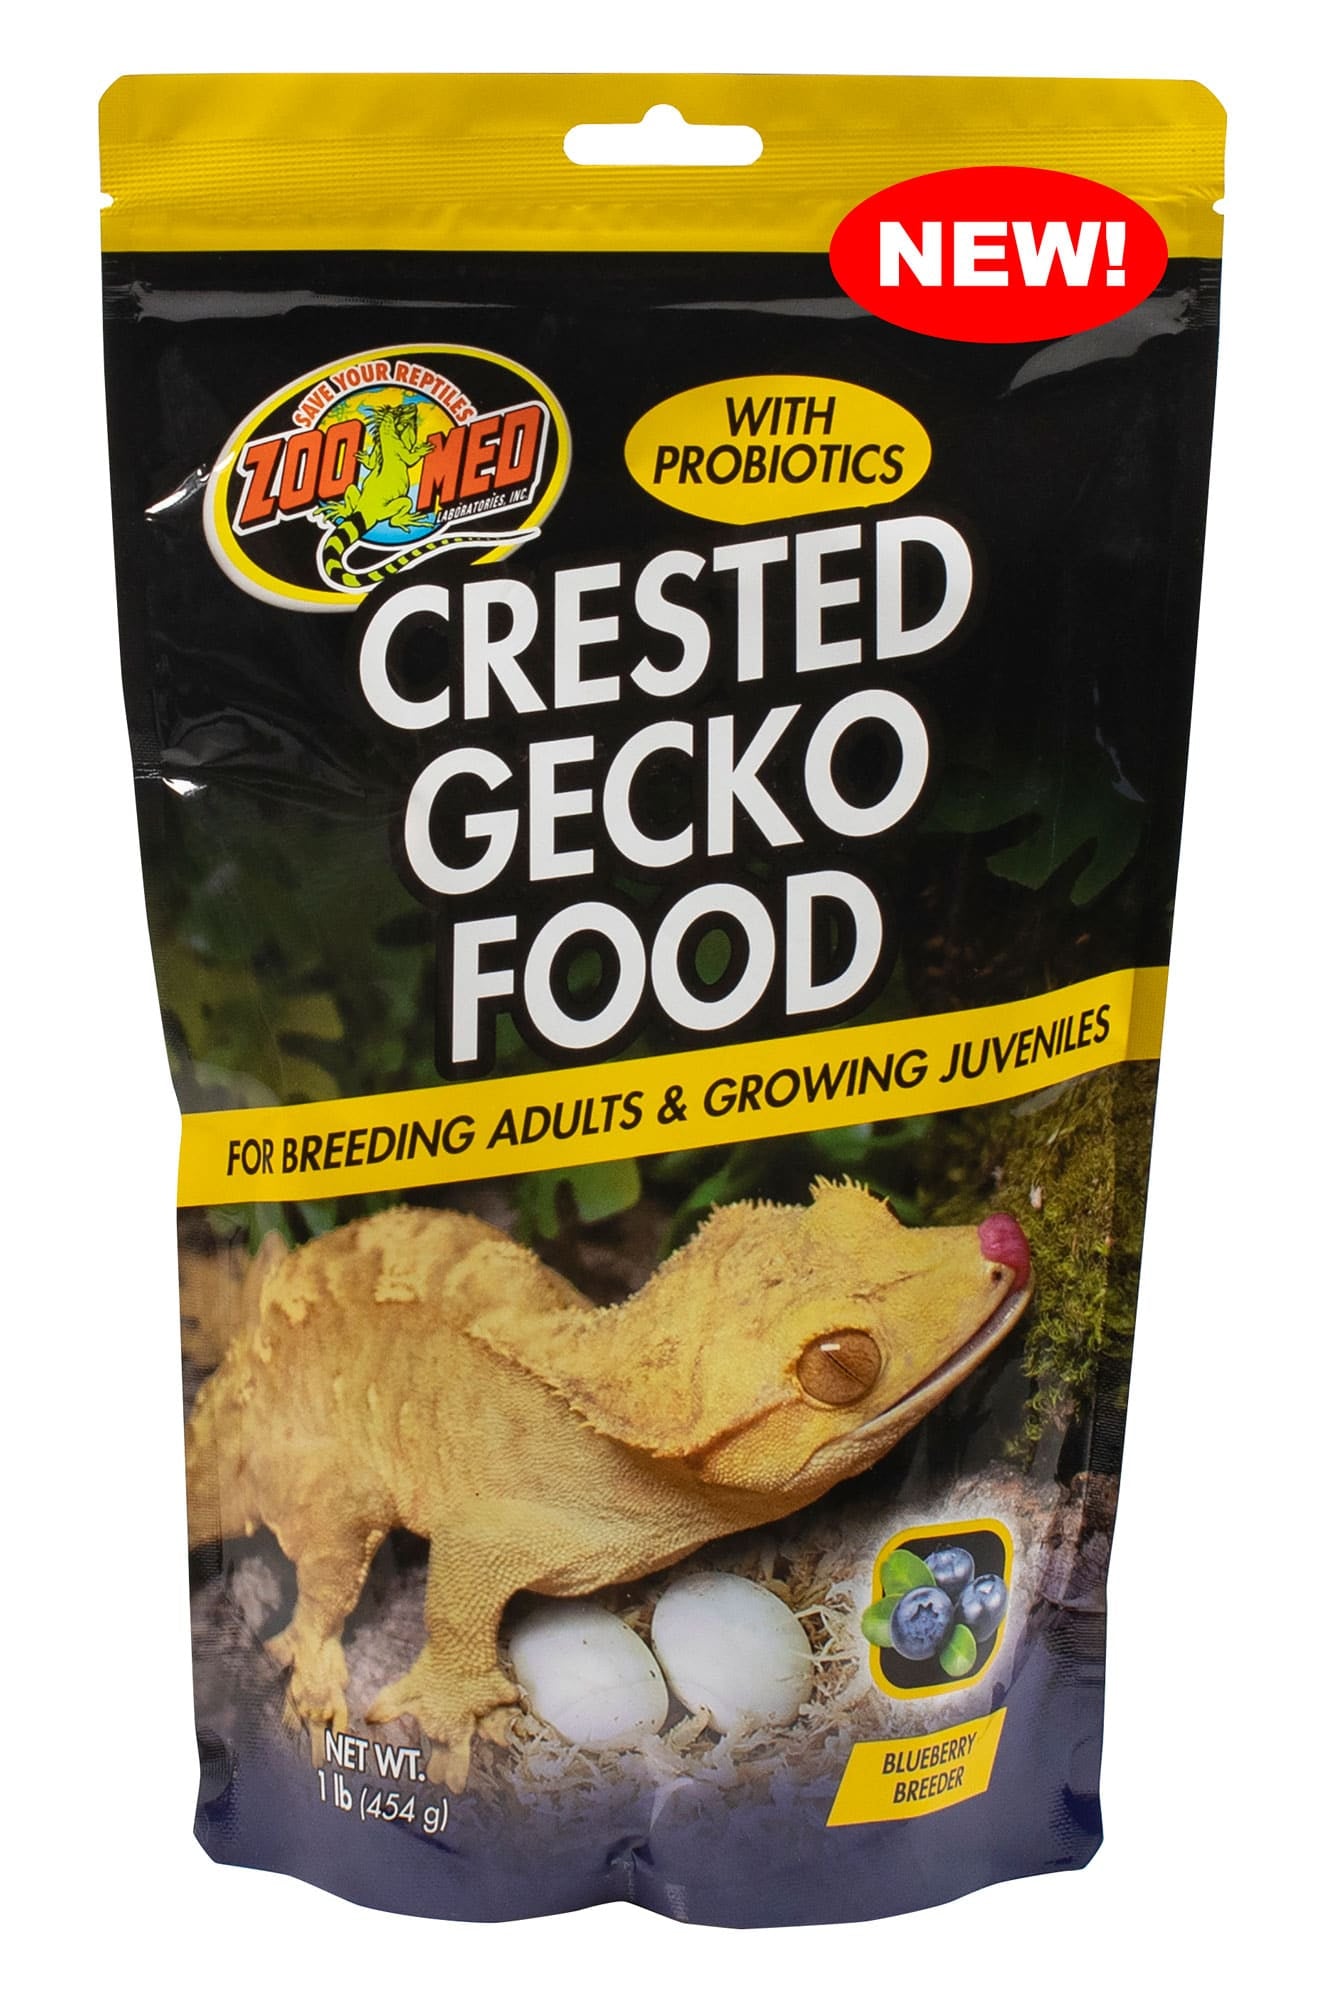 Zoo Med Crested Gecko Food with Probiotics For Breeding Adults and Growing Juveniles Blueberry Flavor